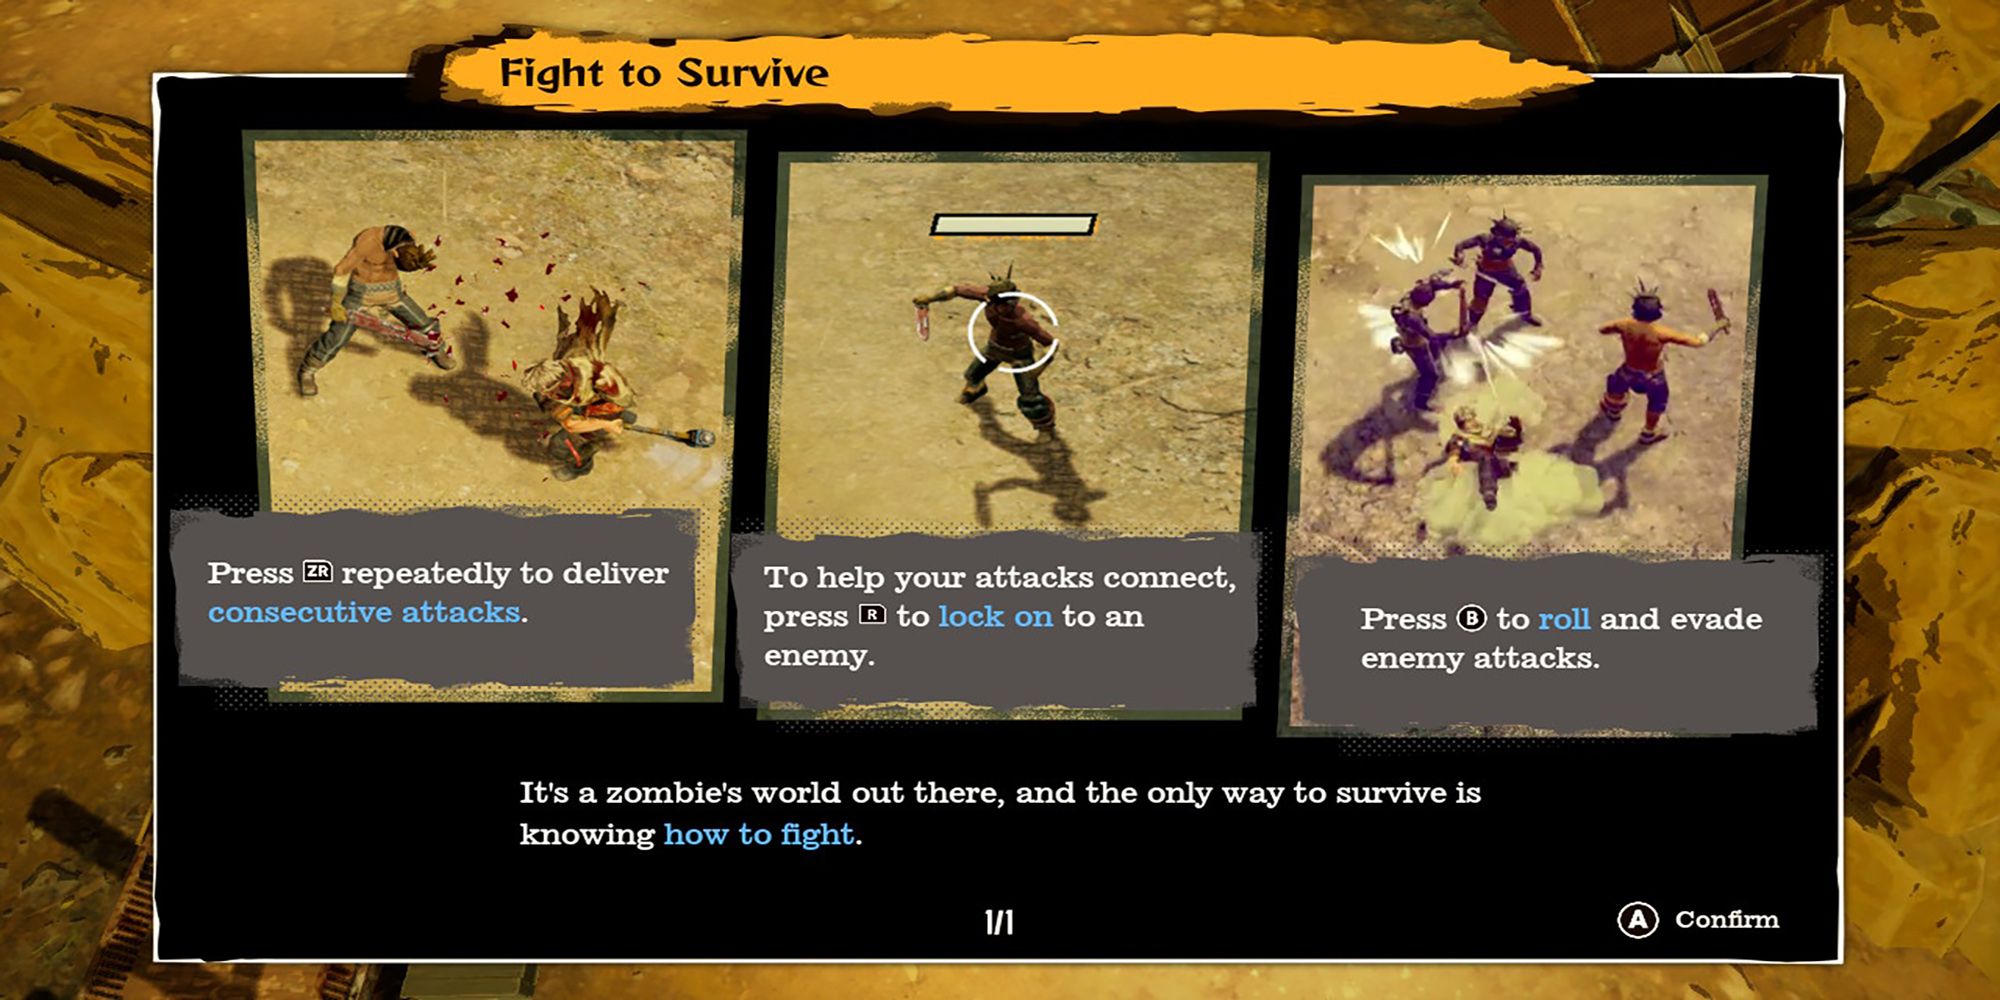 The "Fight To Survive" tutorial teaches attacks, locking on opponents, and the evasive roll in Deadcraft.